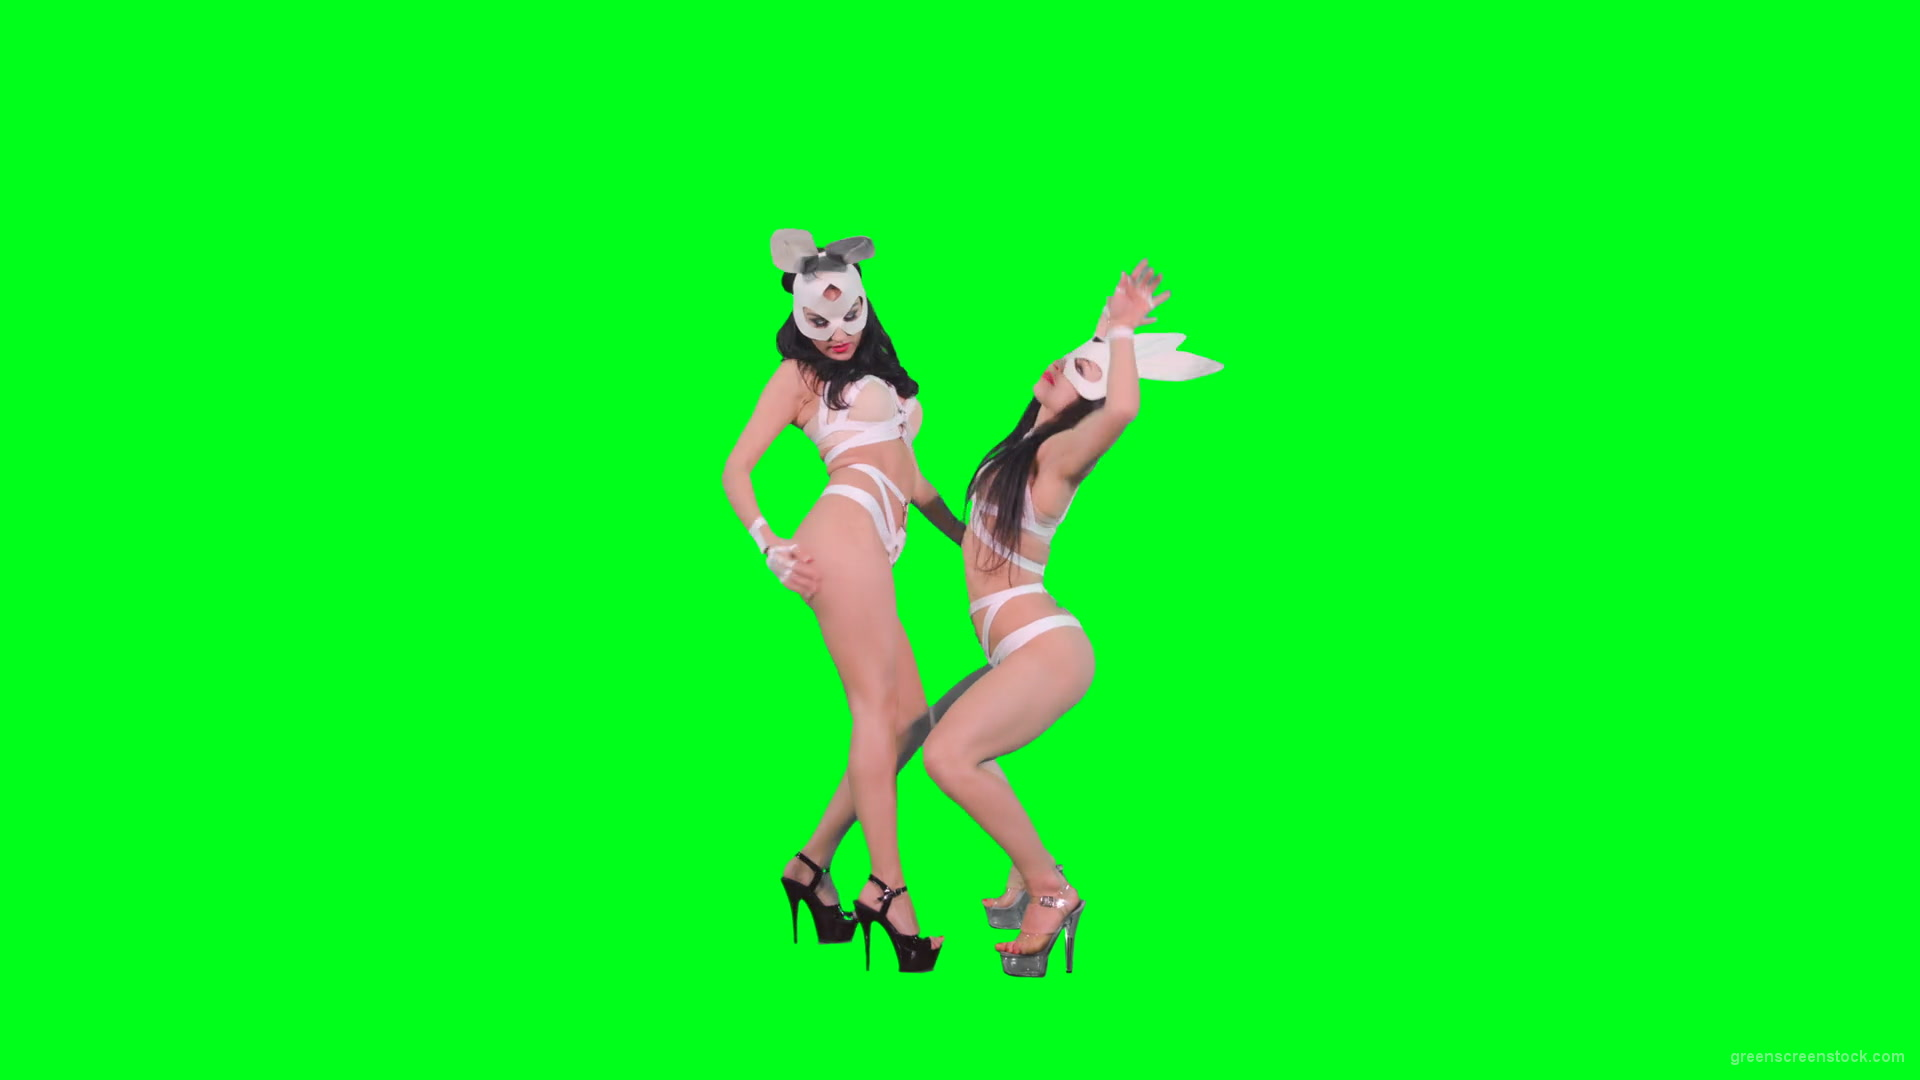 Light-erotic-girls-in-rabbit-playboy-costumes-on-green-screen-moving-sexy-4K-Video-Footage-1920_004 Green Screen Stock